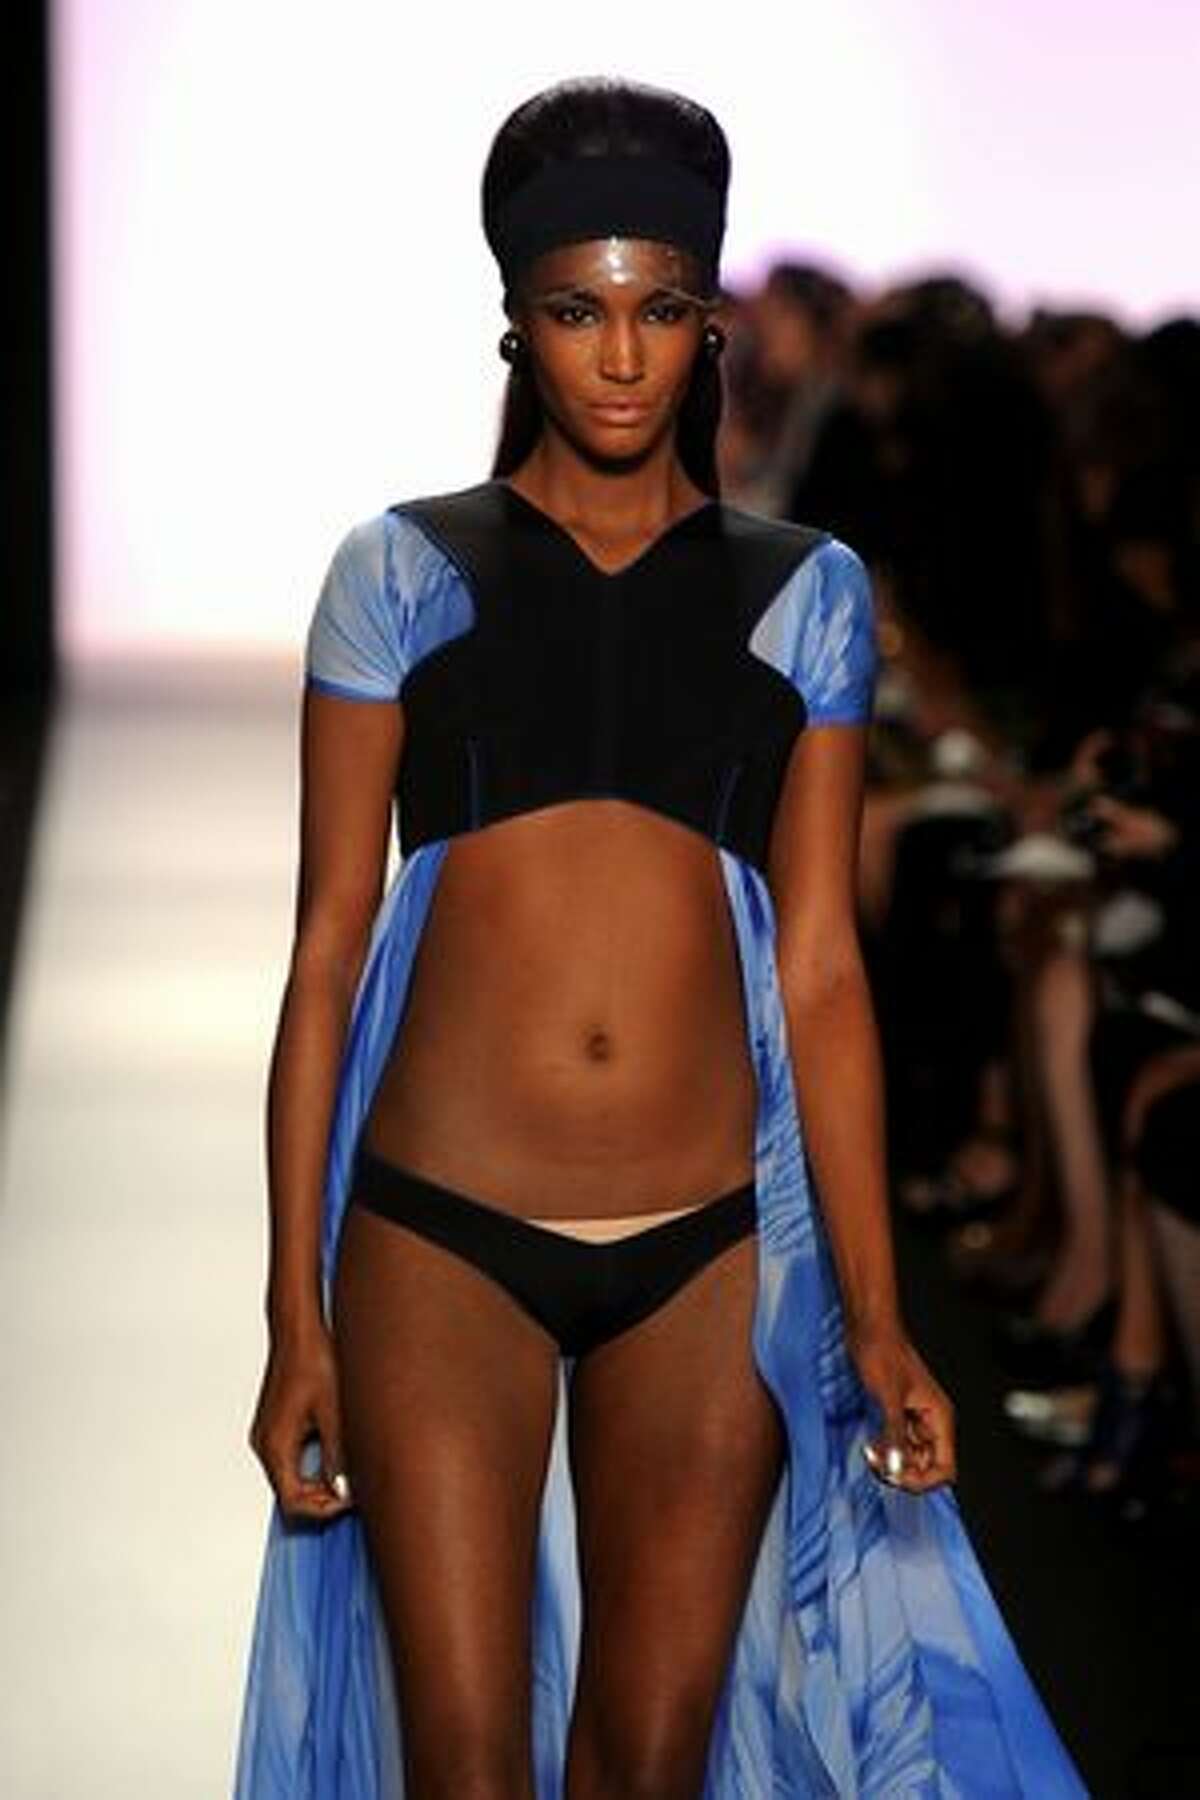 A model walks the runway at the Gottex Spring 2011 fashion show during Mercedes-Benz Fashion Week in New York City.